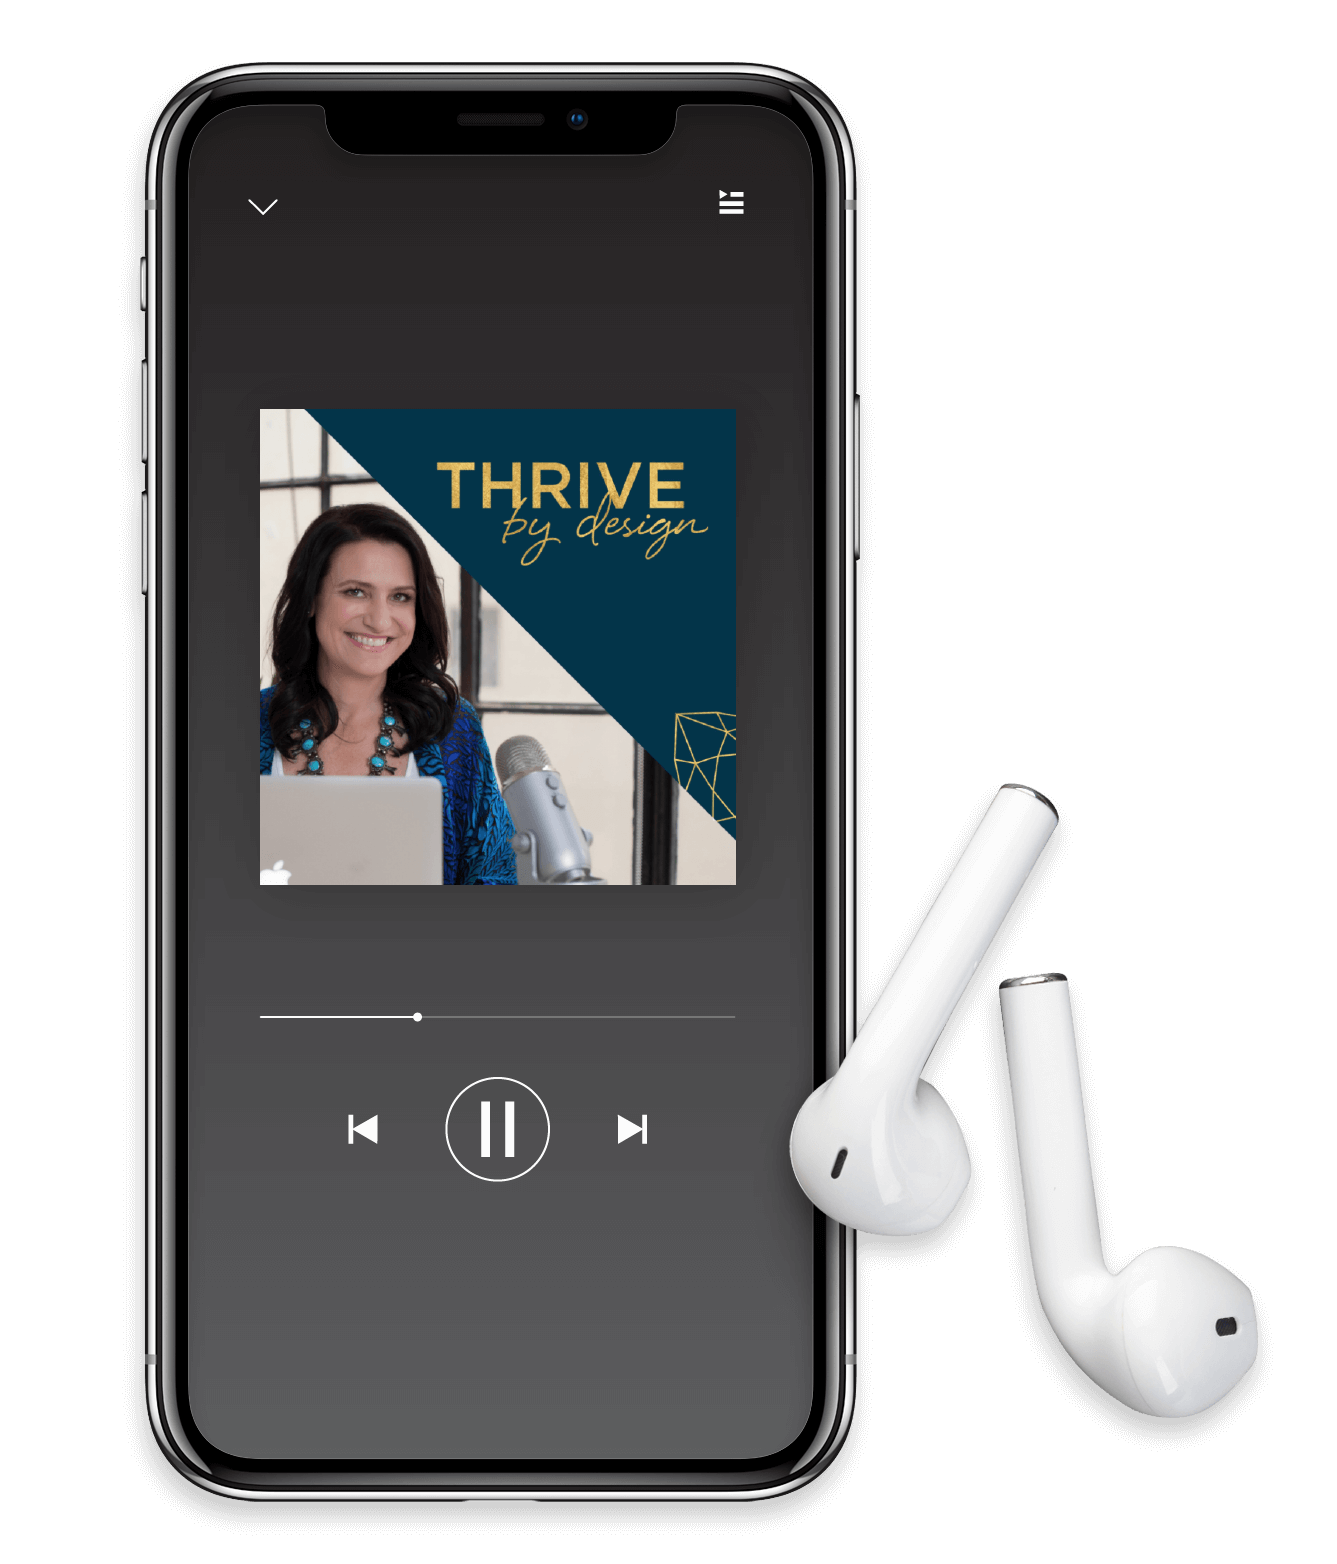 F&T Thrive By Design Podcast Mockup Iphone-01